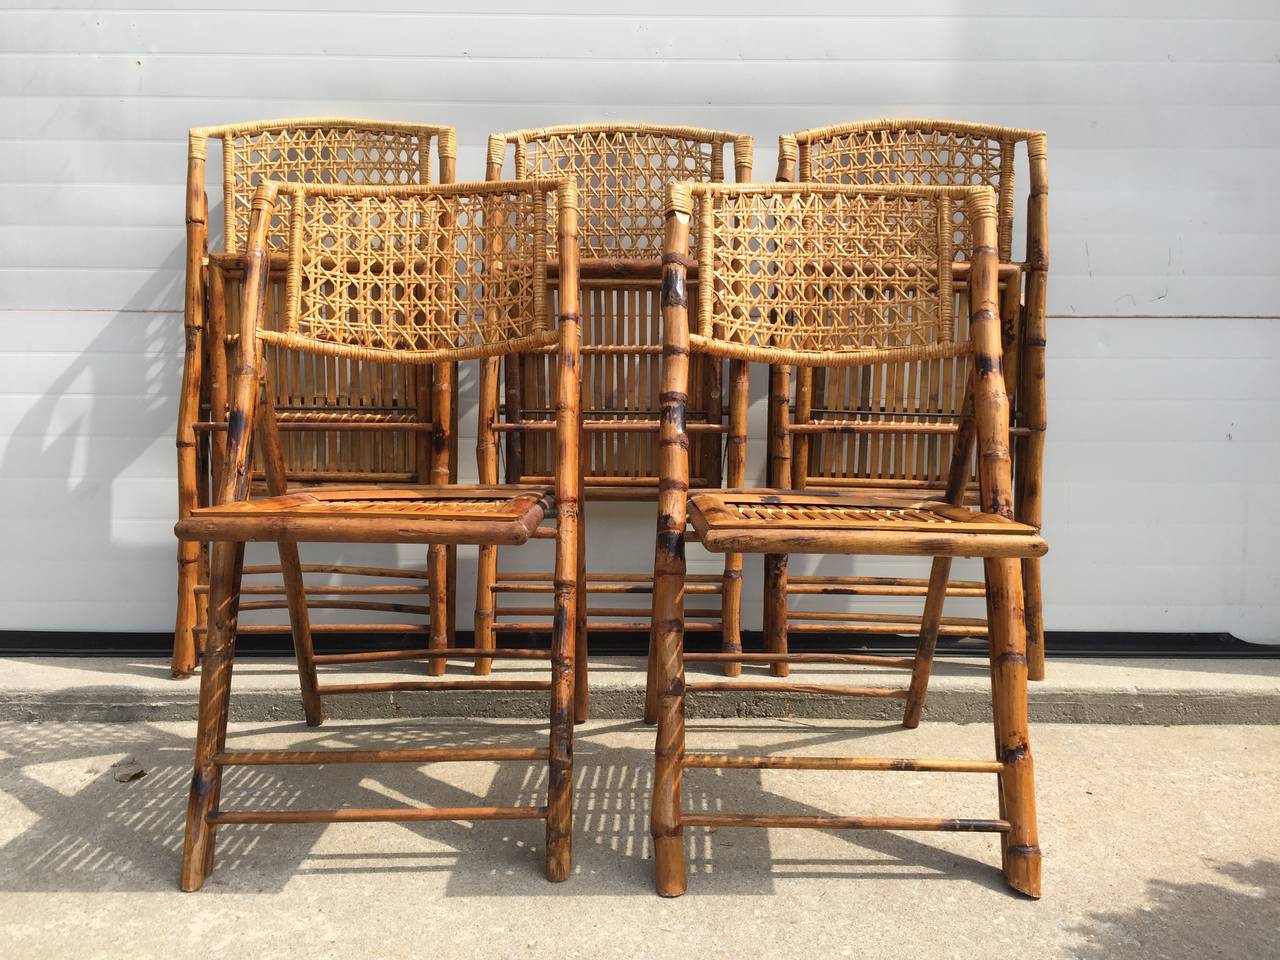 20th Century Set of Five Scorched Bamboo Frame Folding Chairs with Rattan Seat and Back